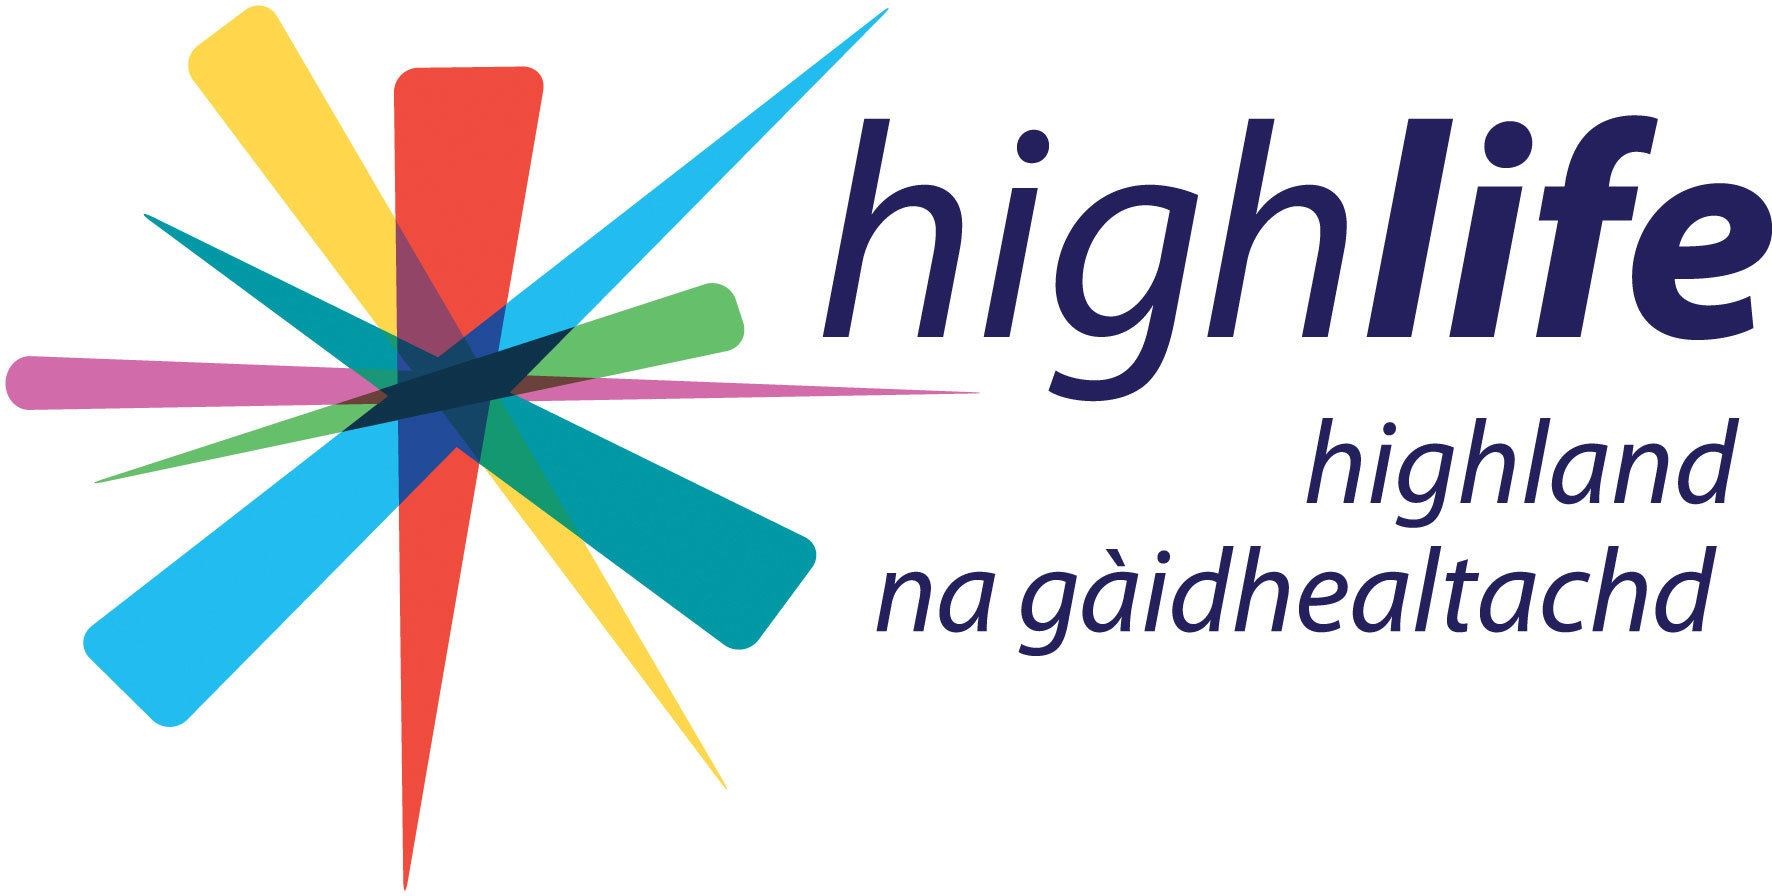 High Life Highland are working with NHS Highland to support diabetes type 2 sufferers